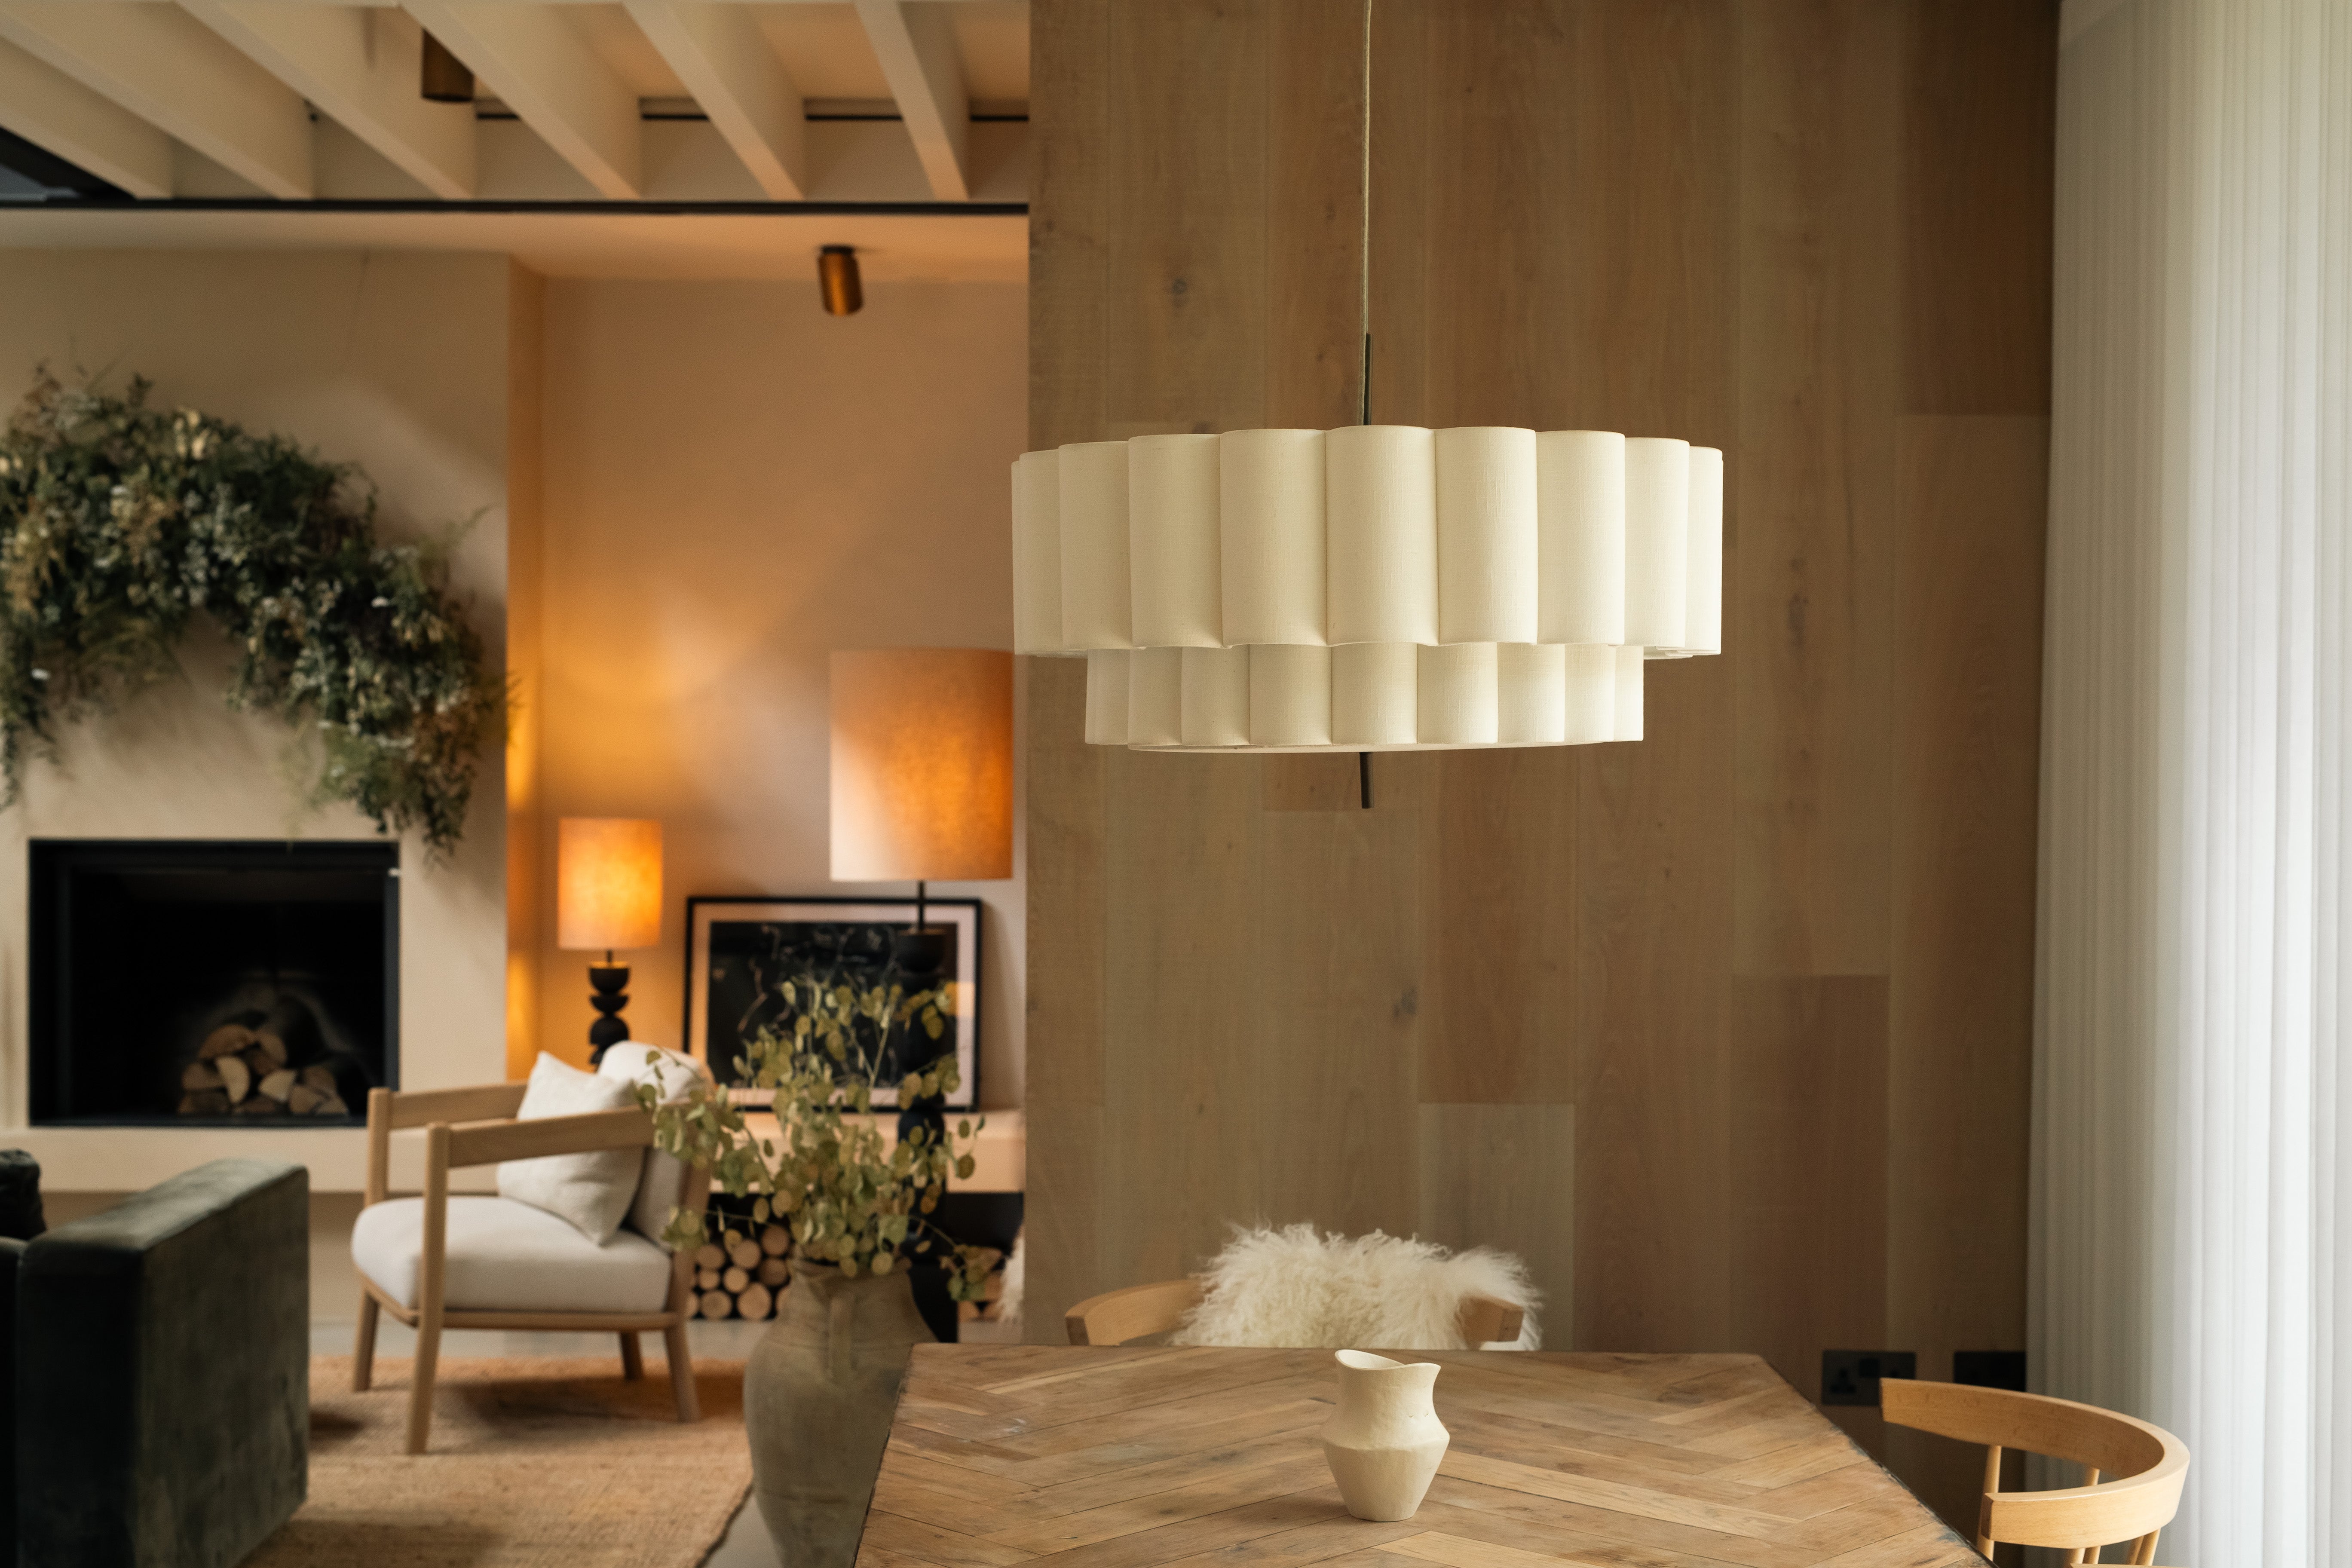 Varied lighting can add warmth and ambience to a room